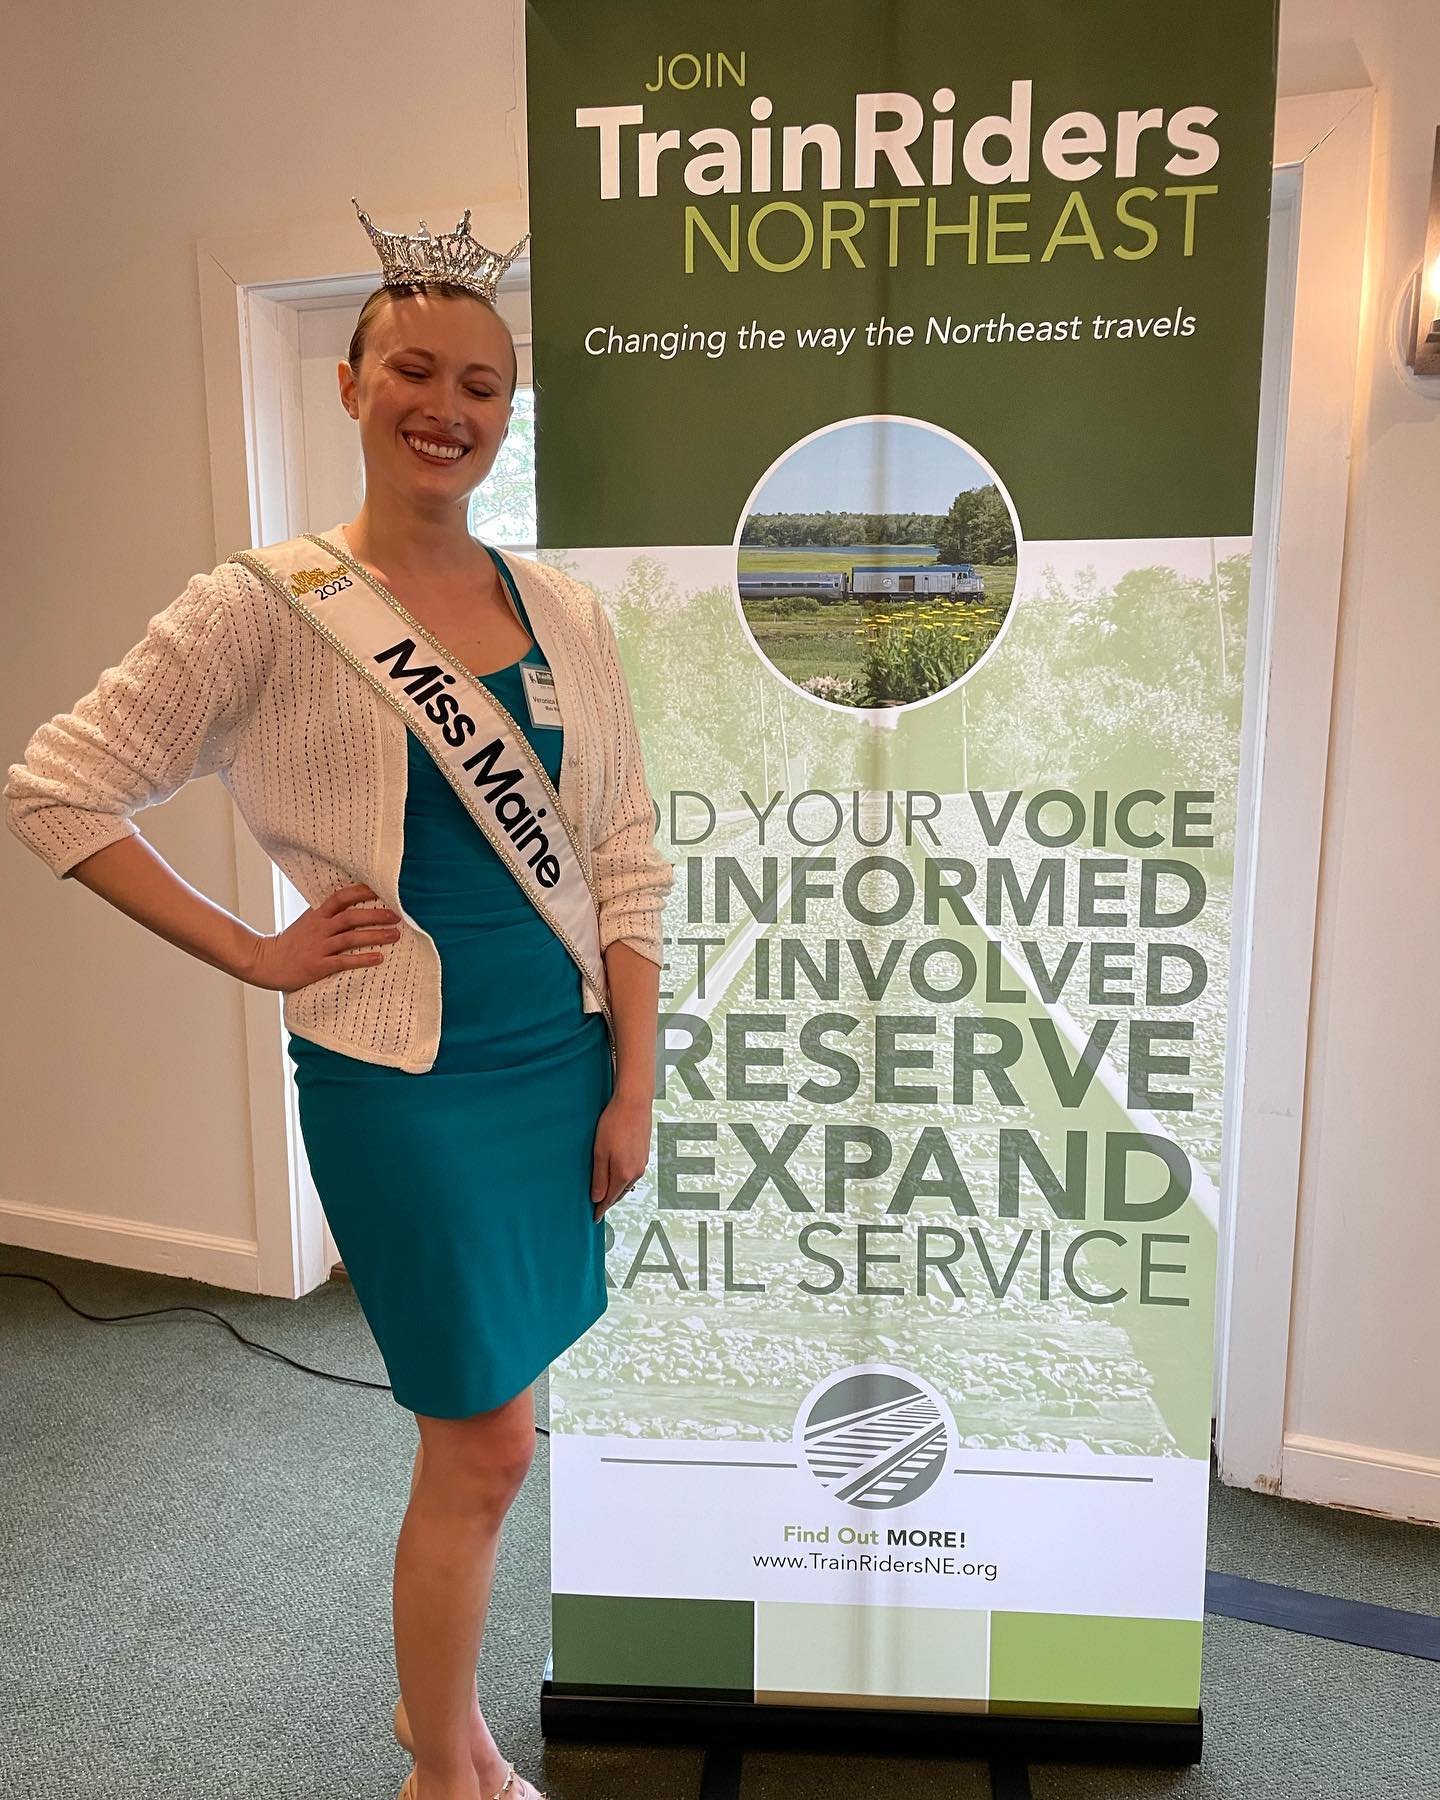 Today, I had the great honor of speaking at the Train Riders Northeast annual meeting alongside many excellent guest speakers, including Roger Harris, President of Amtrak. I spoke about my love of riding the train, and my deeply held belief that publ